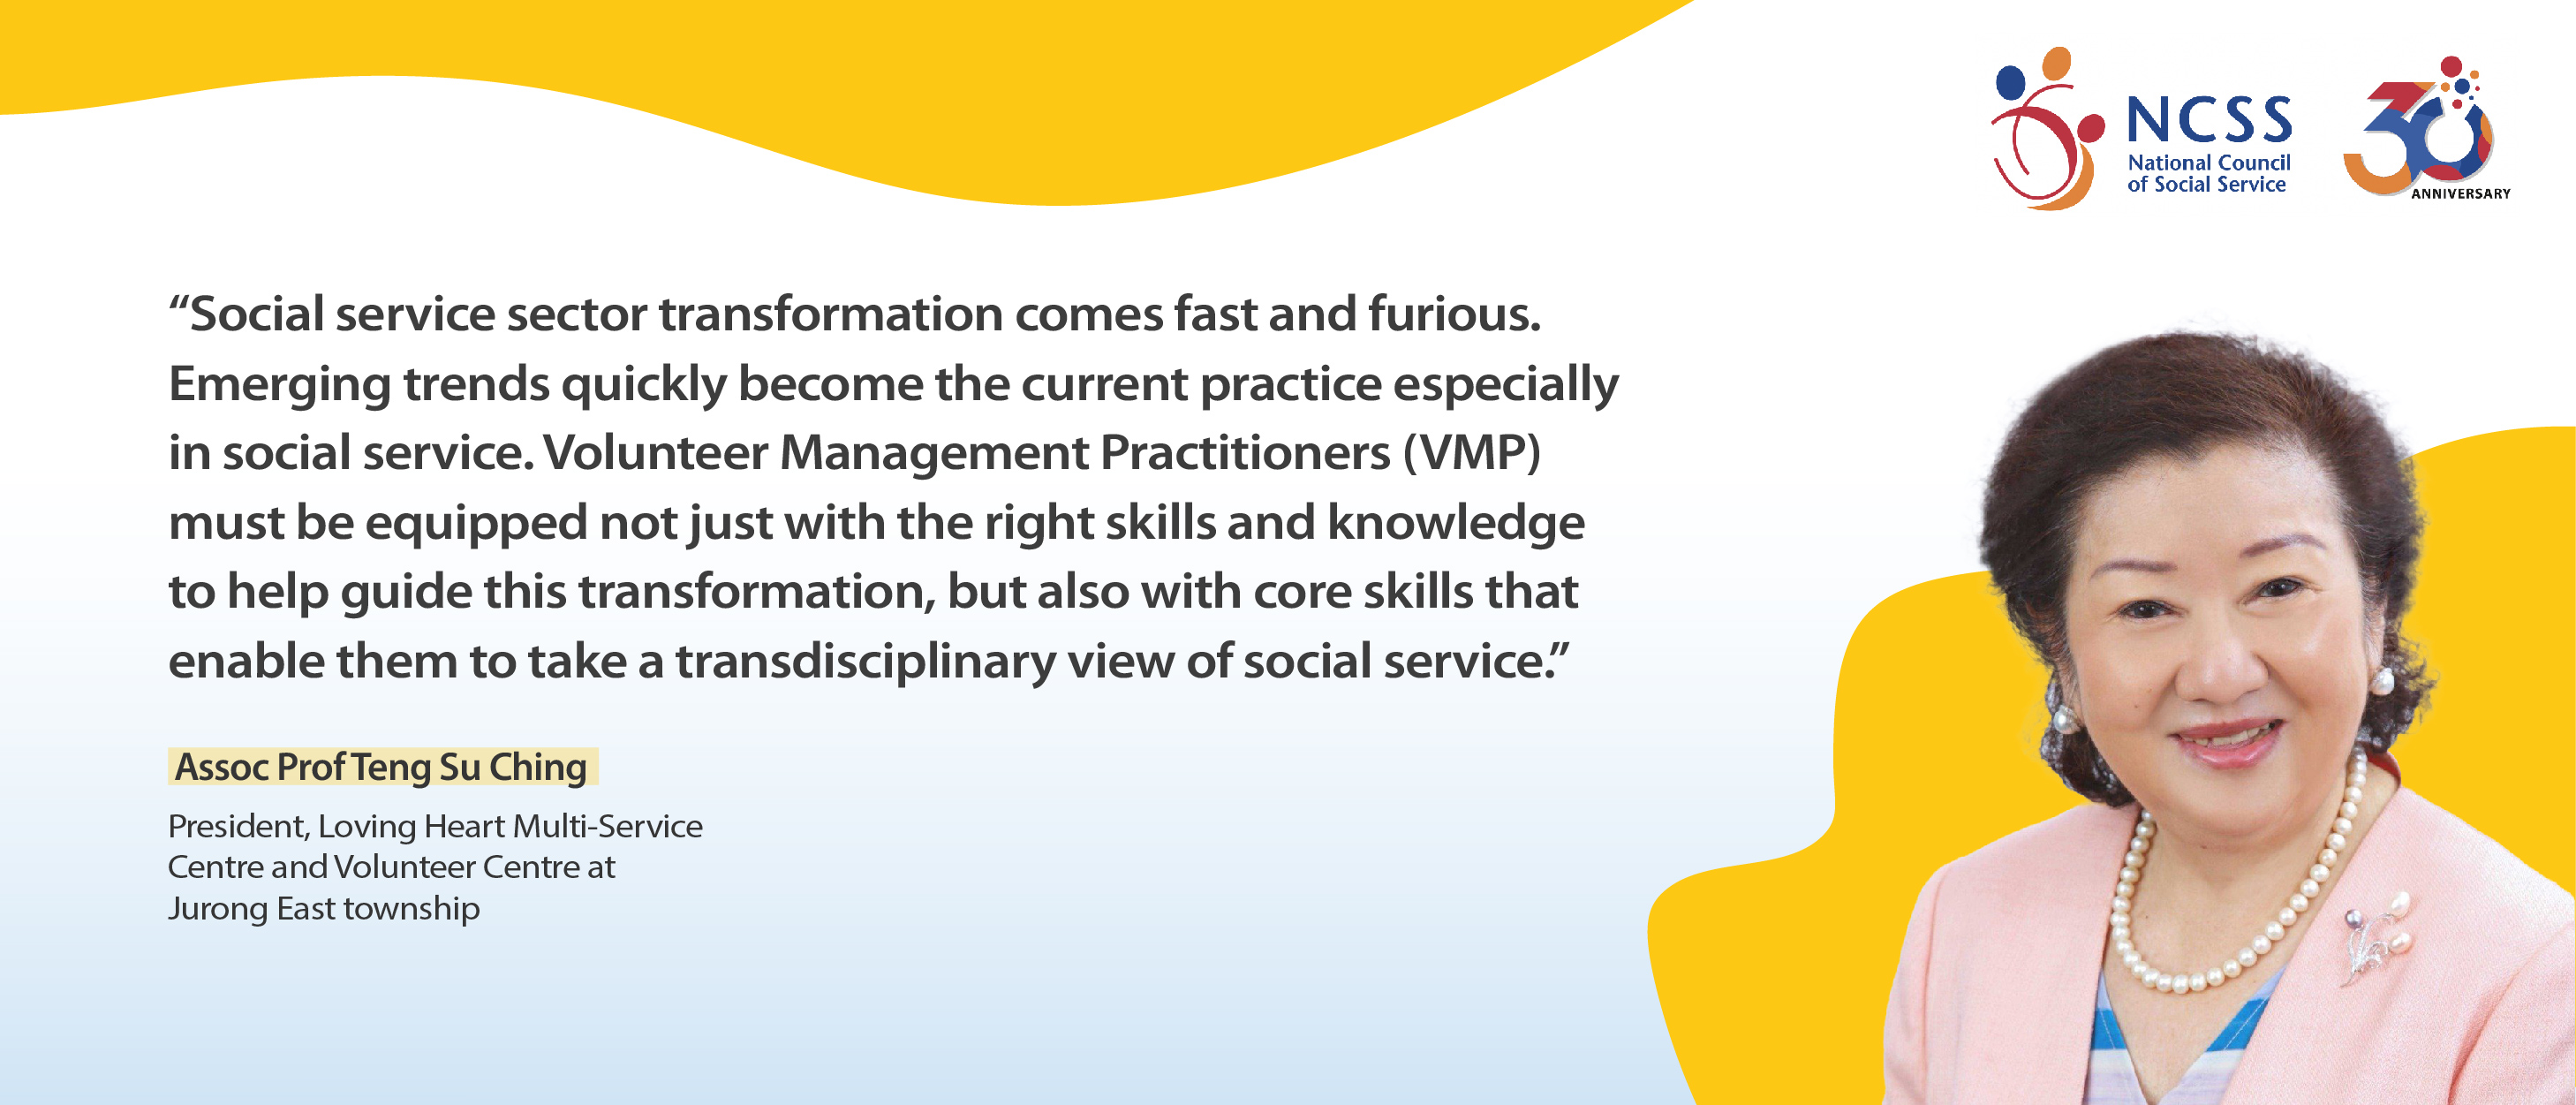 A comment about Learning  Development Roadmap by president of loving heart multi service centre and volunteer centre, Assoc Prof Teng Su Ching, "Social service sector transformation comes fast and furious. Emerging trends quickly become the current practice especially in social service. volunteer management practitioners (VMP) must be equipped not just with the right skills and knowledge to help guide this transformation, but also with core skills that enable them to take a transdisciplinary view of social service."